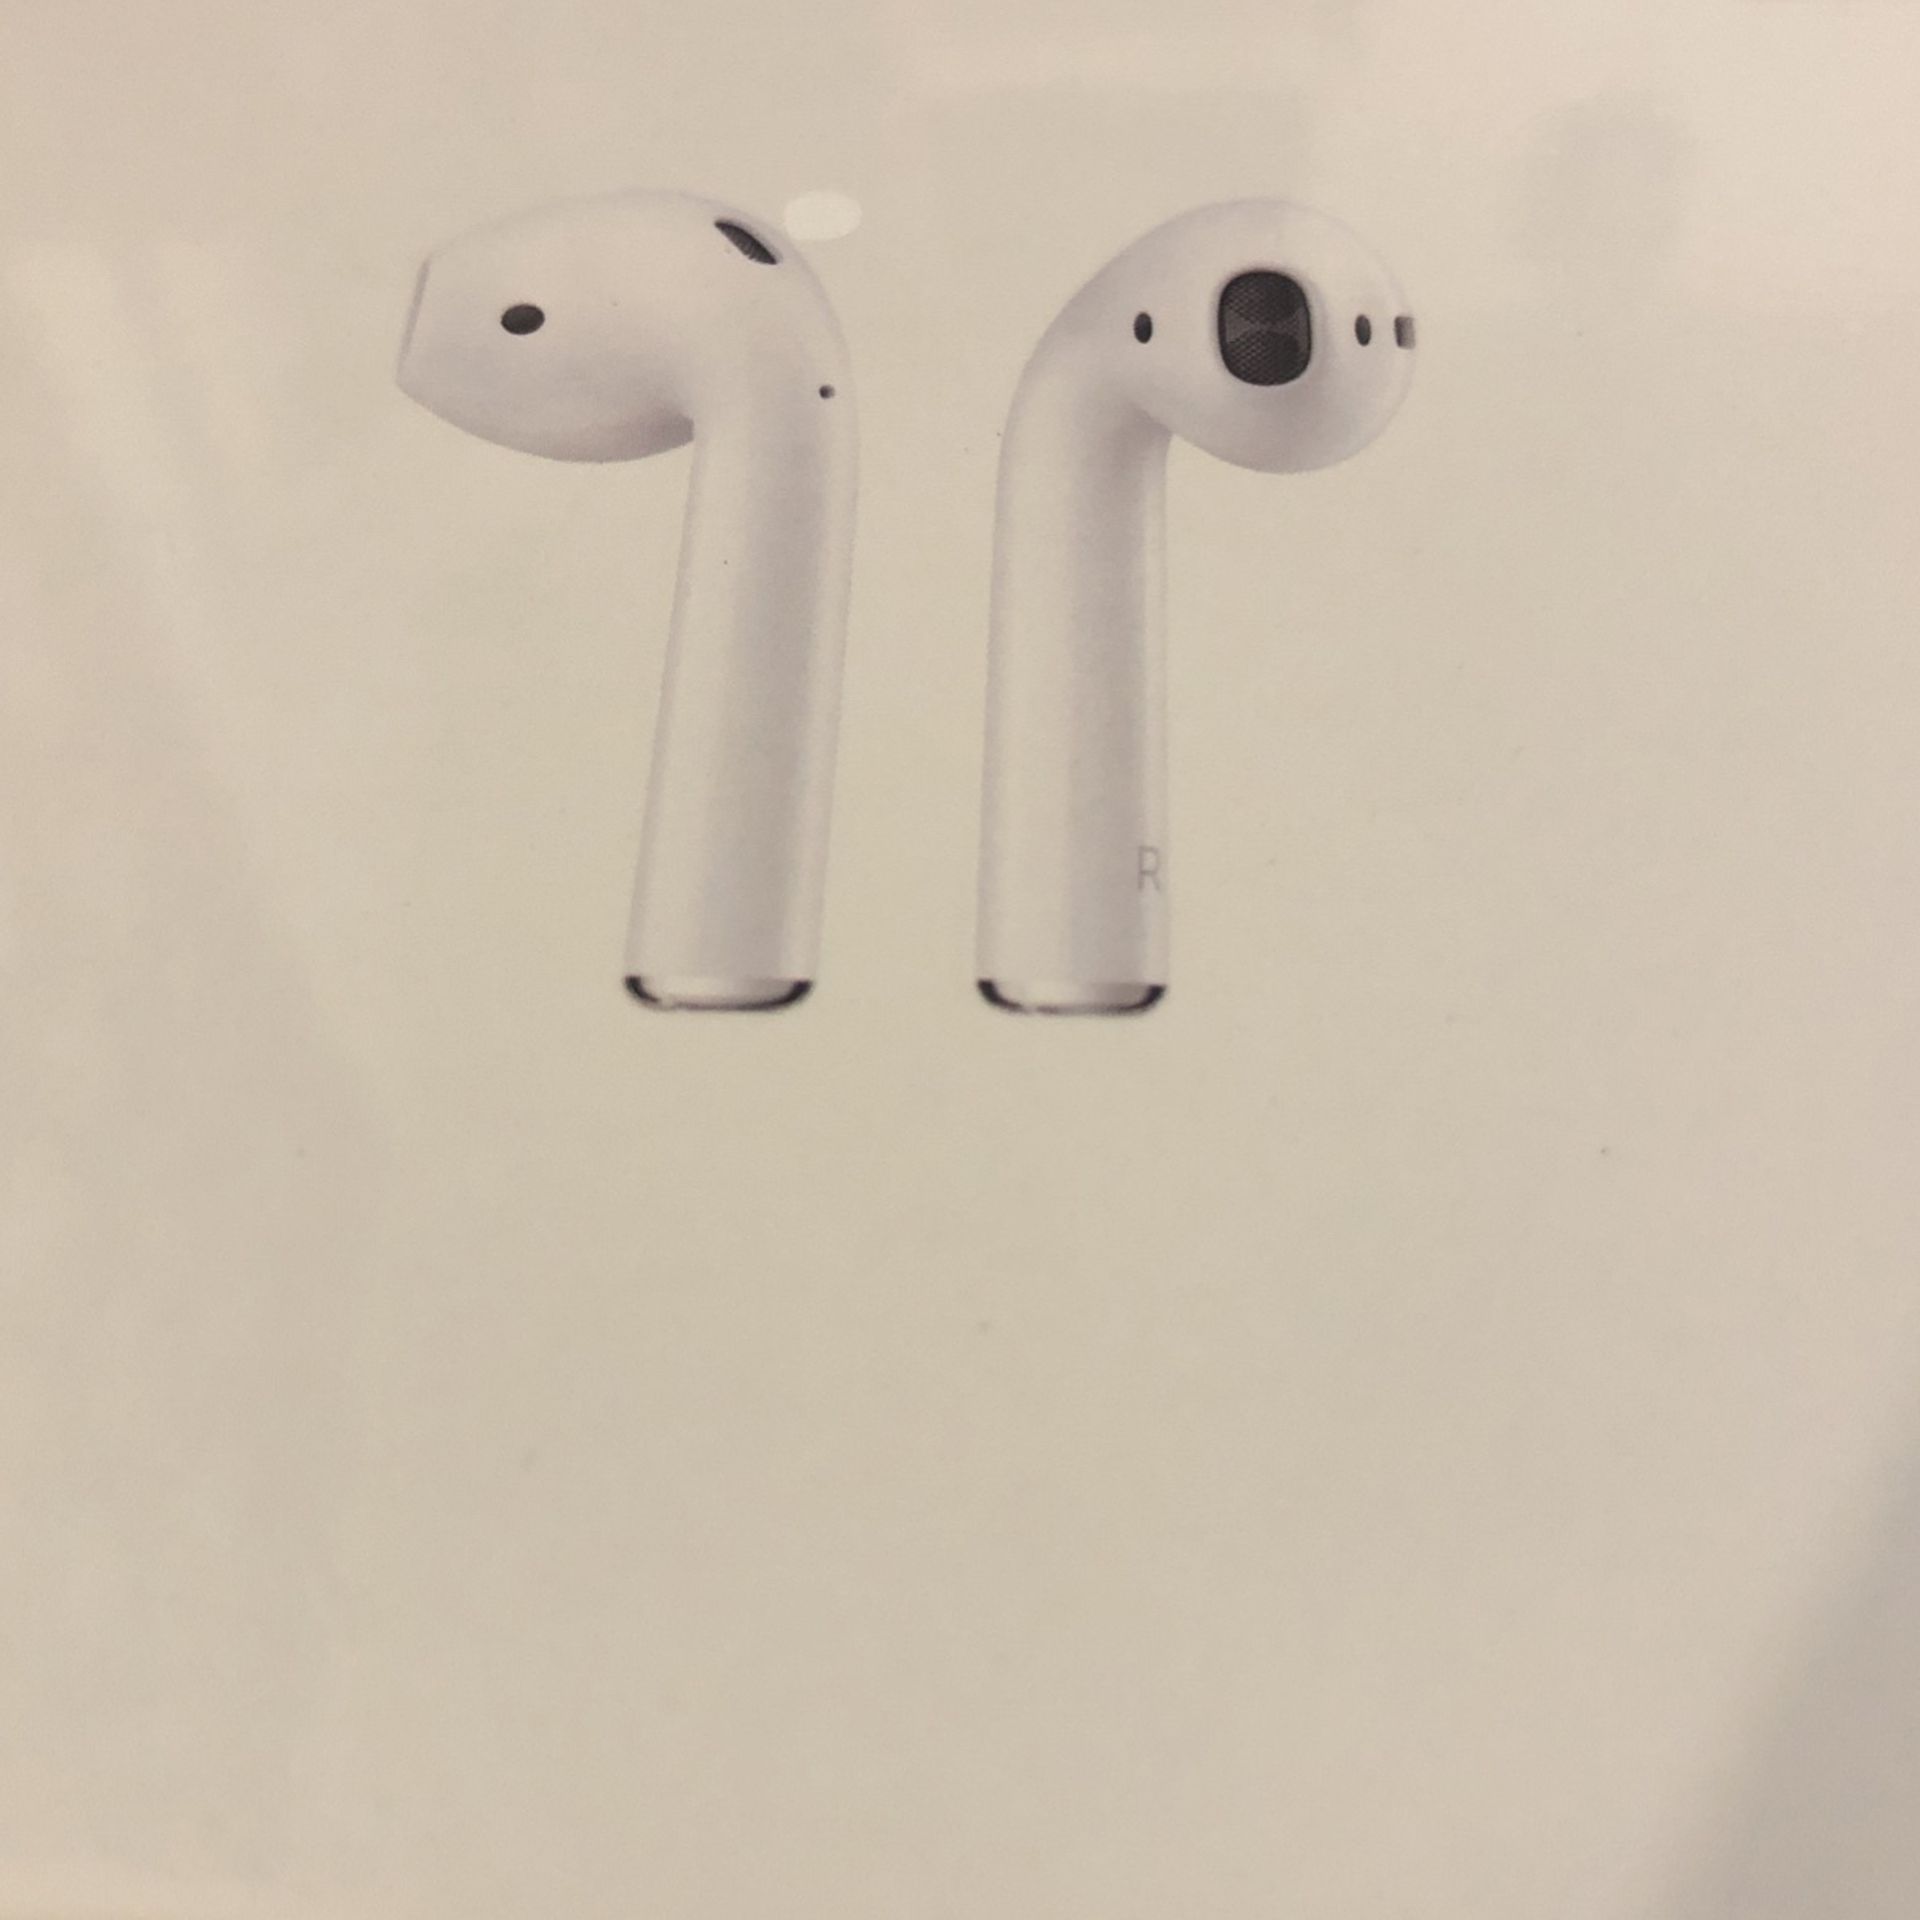 AirPods Second Generation With Gps Original 